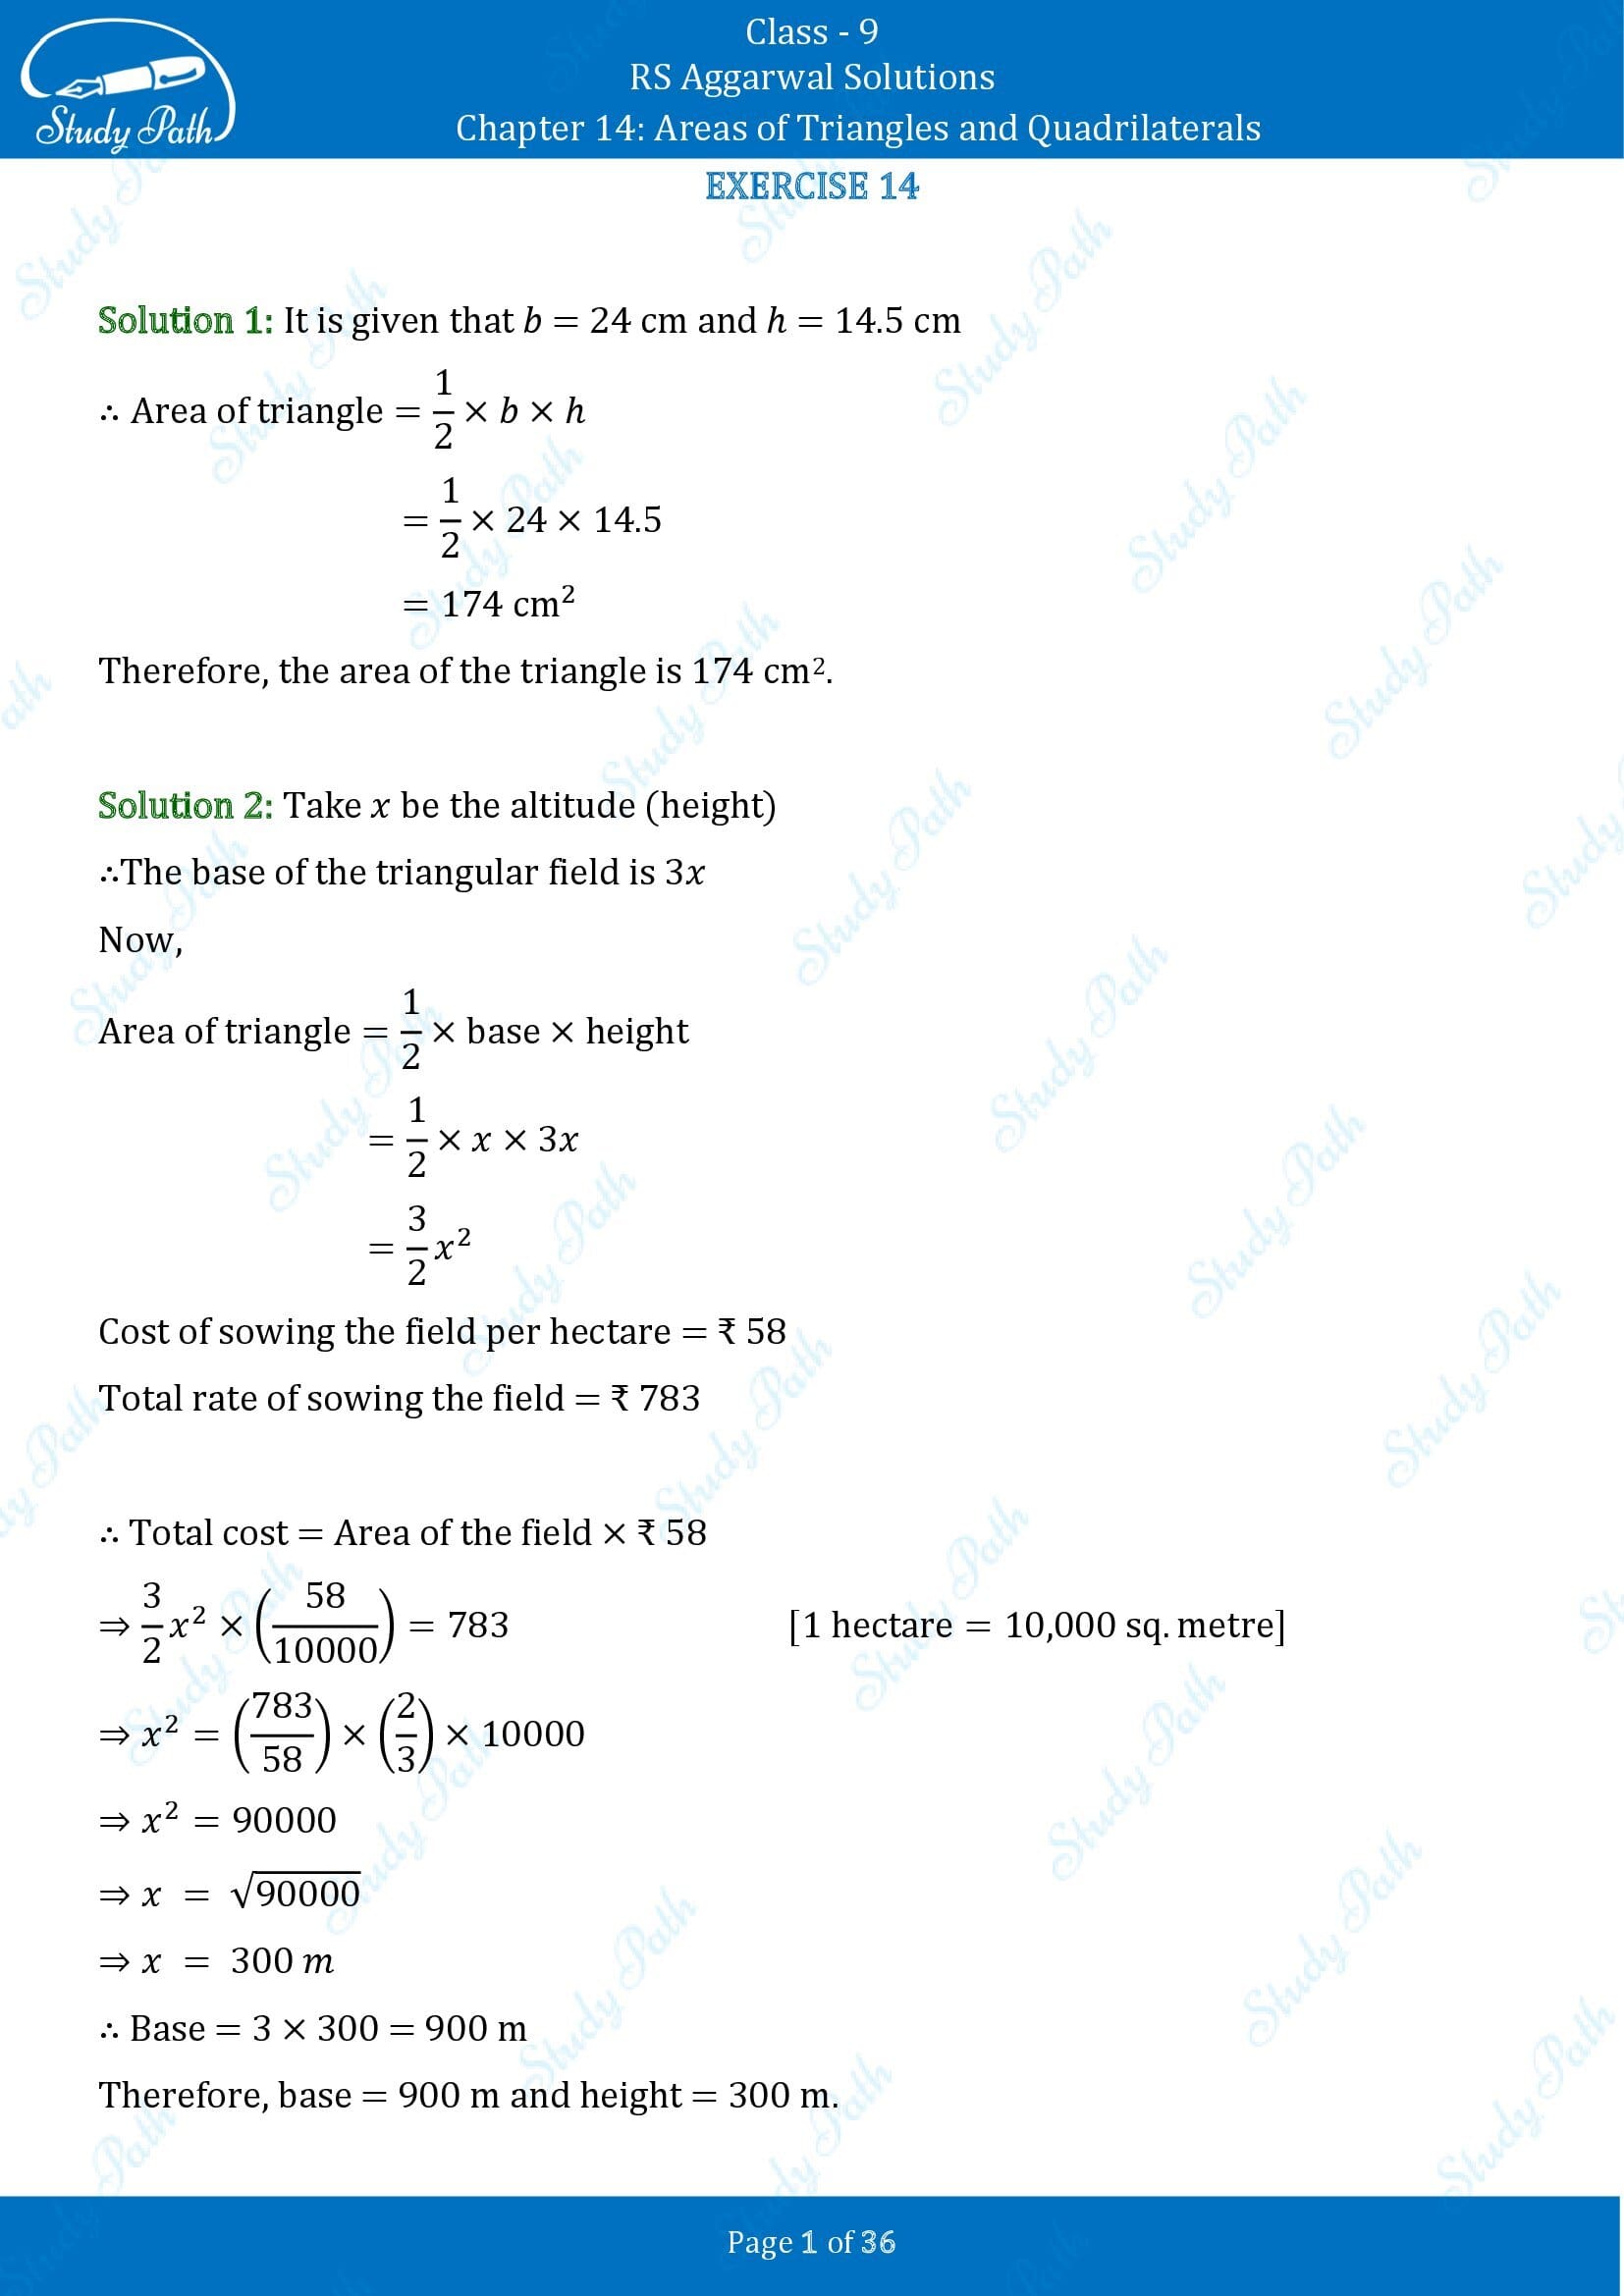 RS Aggarwal Solutions Class 9 Chapter 14 Areas of Triangles and Quadrilaterals Exercise 14 00001